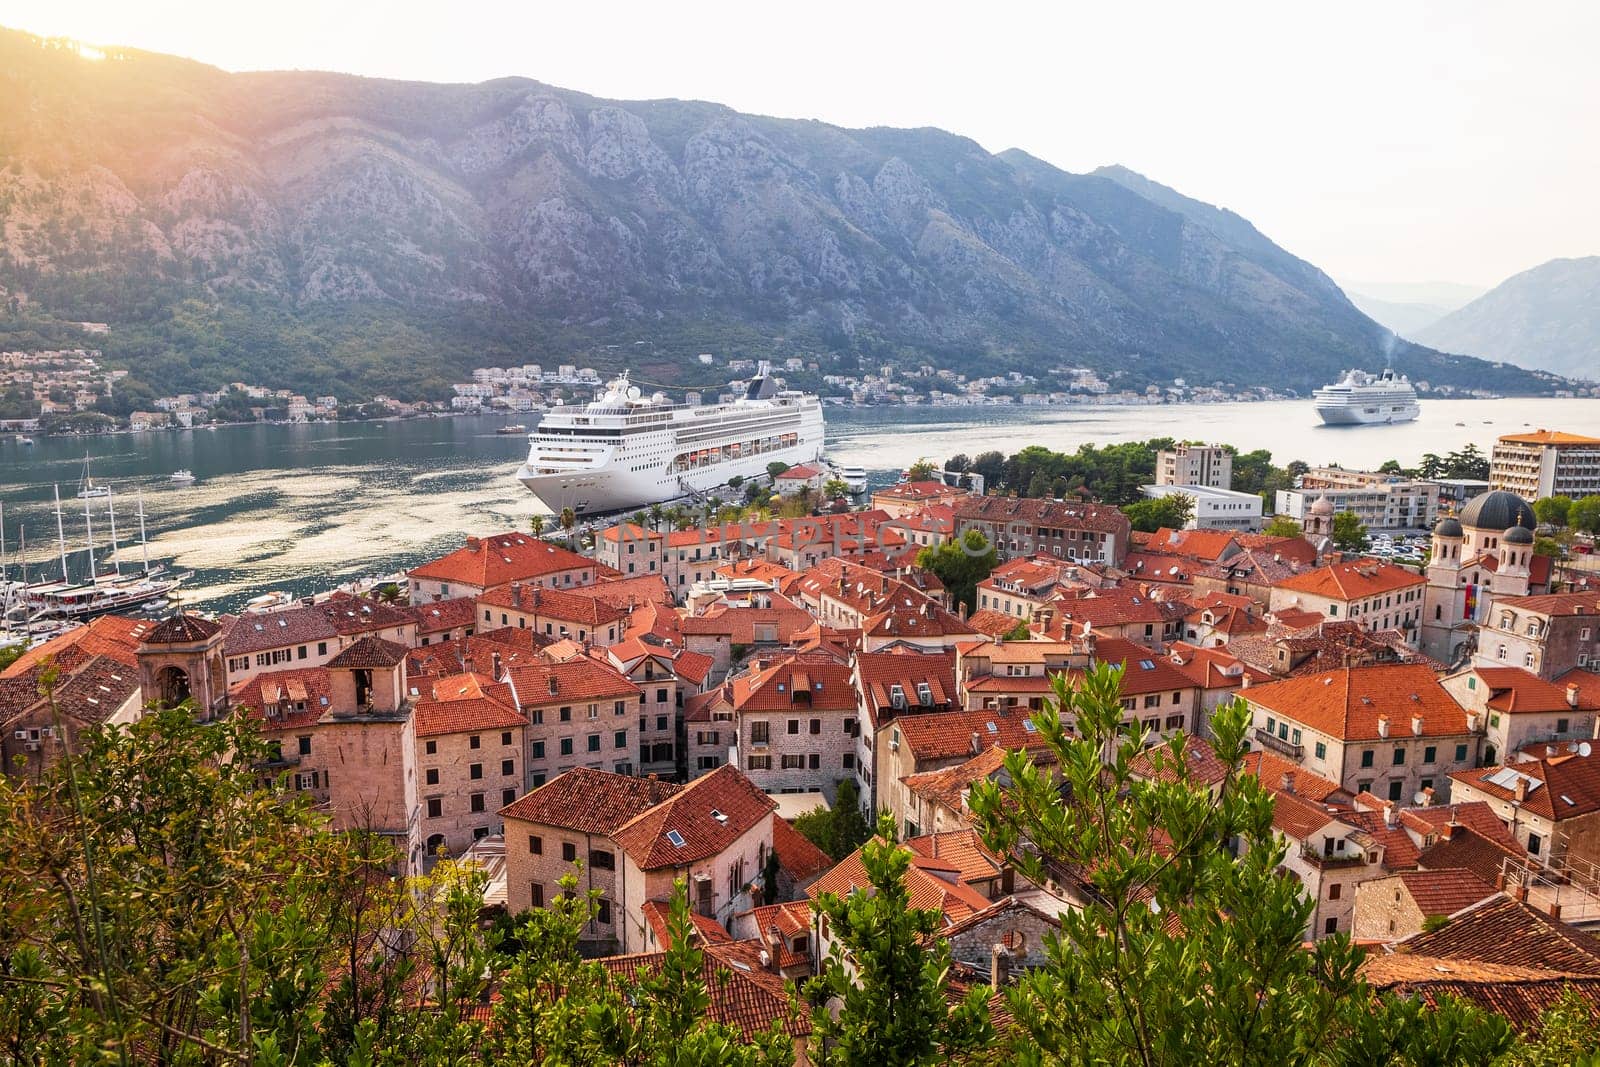 The bay of the city of Kotor in Montenegro by Syvanych